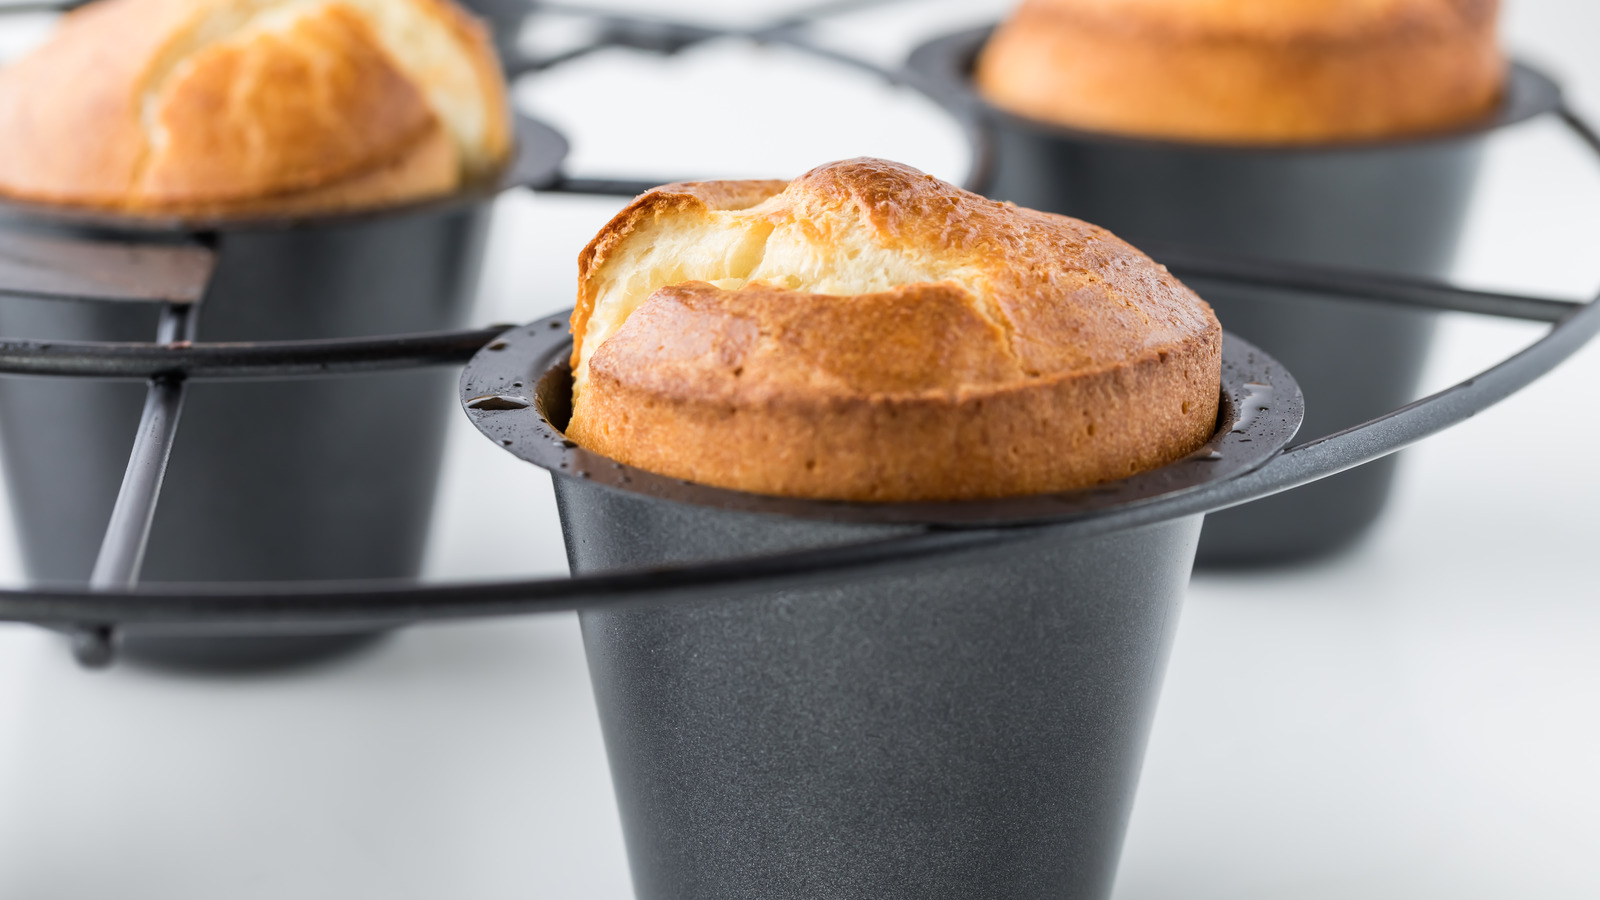 https://www.mashed.com/img/gallery/do-you-really-need-a-special-pan-to-make-popovers/l-intro-1614208698.jpg